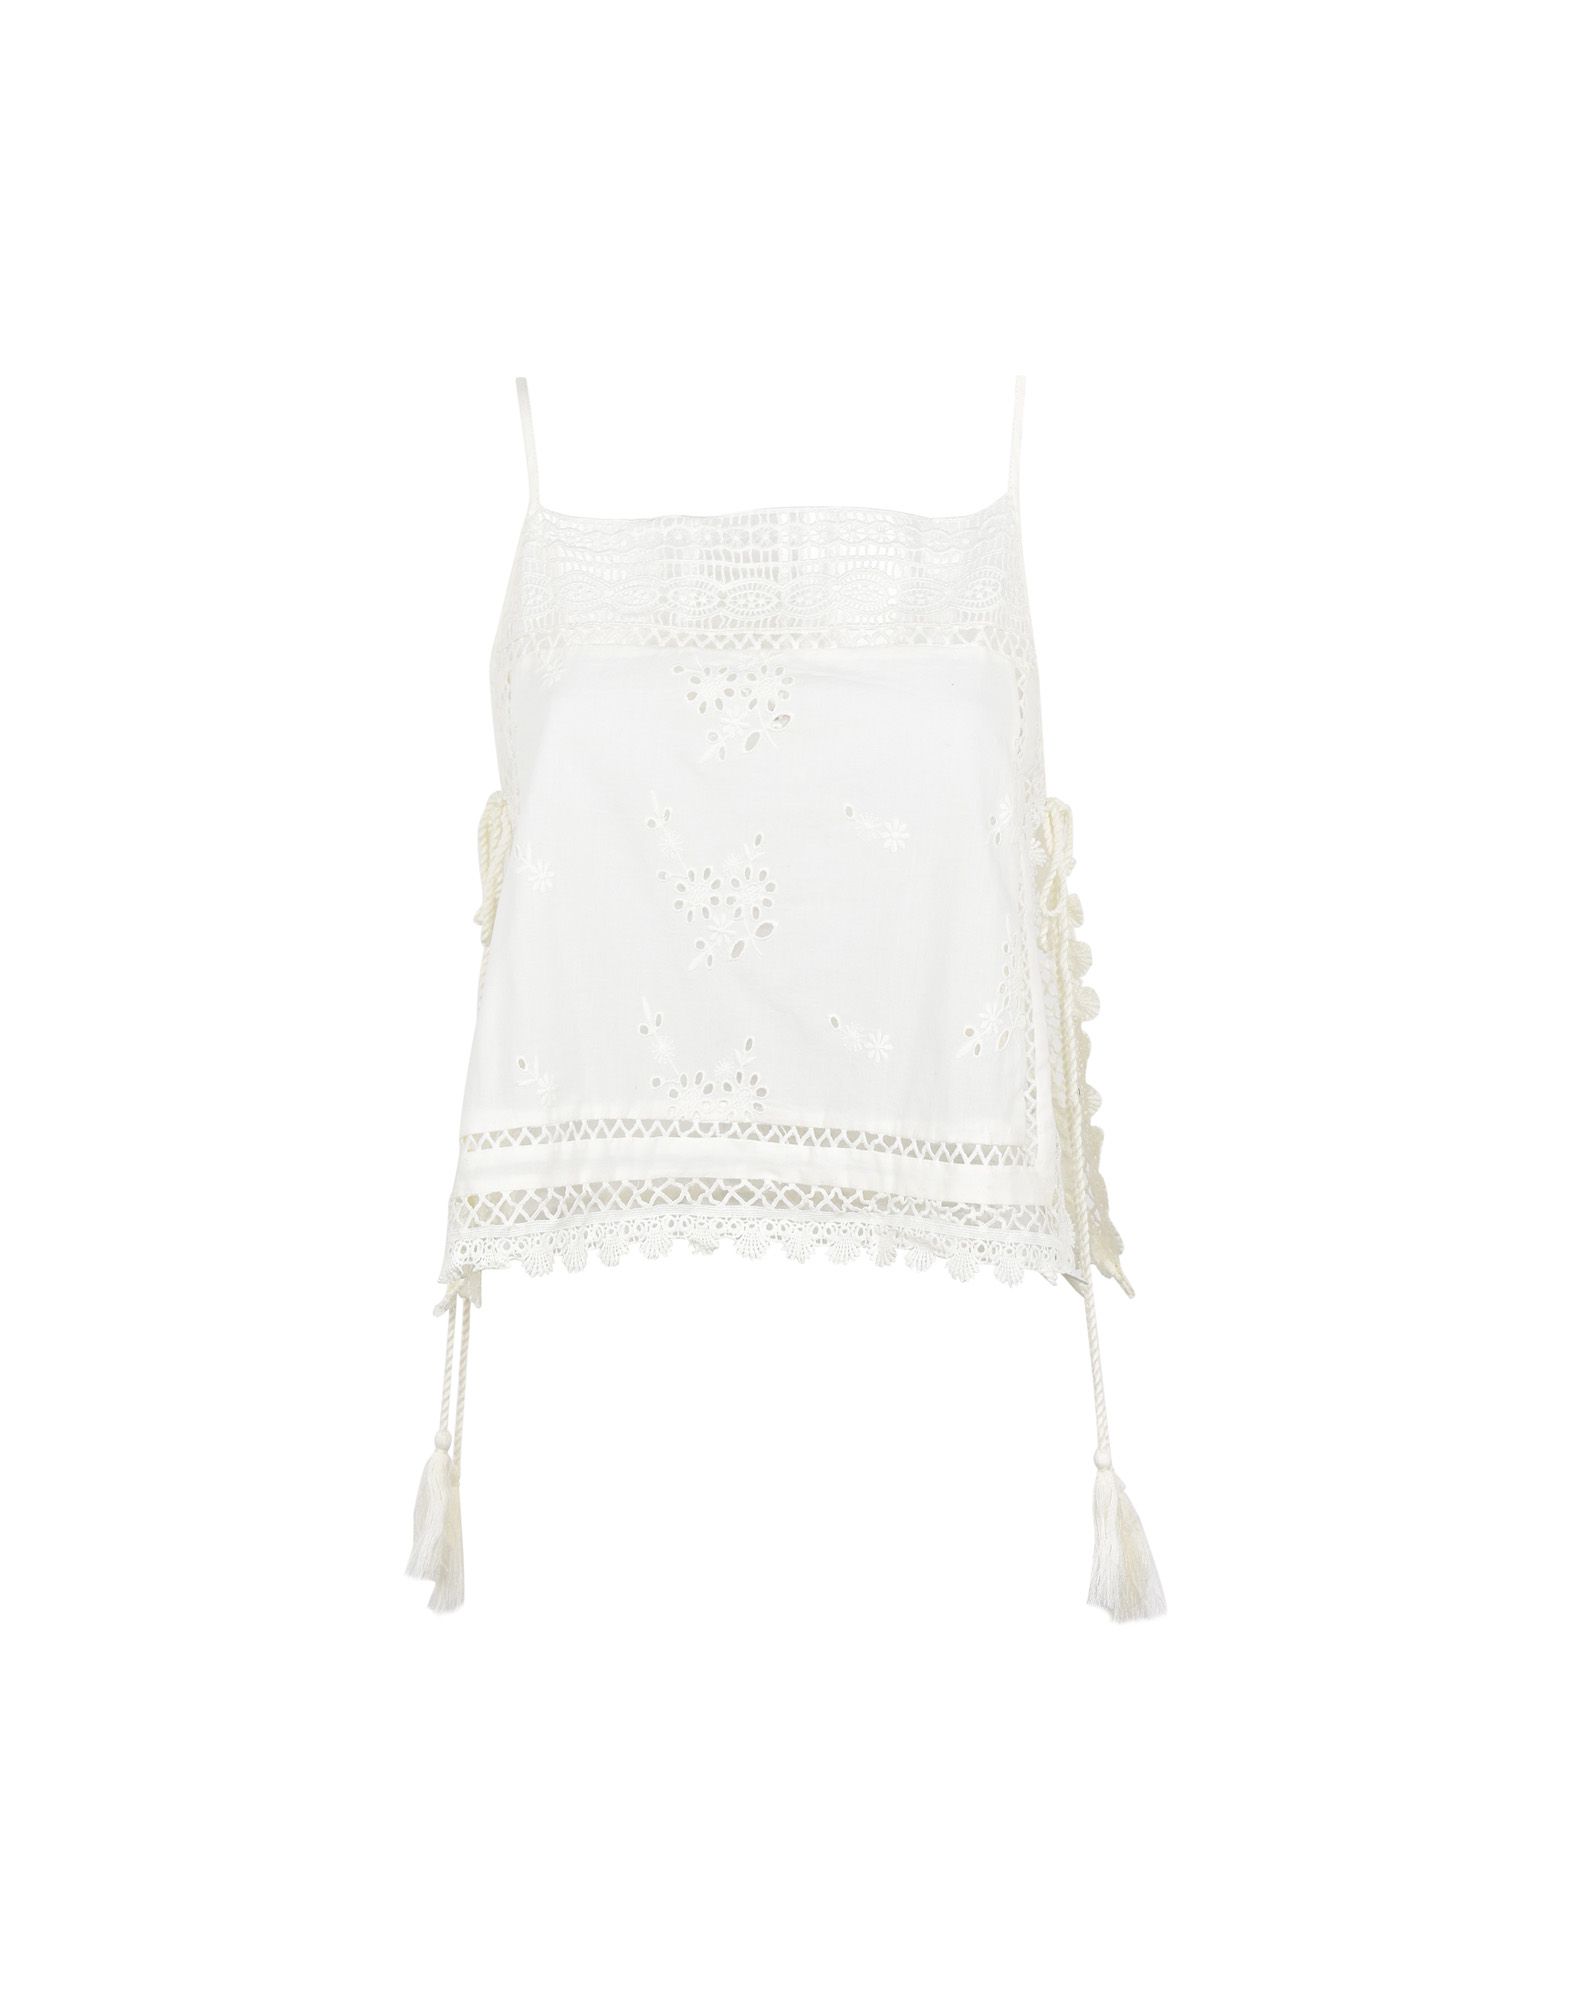 FREE PEOPLE Top,12168630AD 6